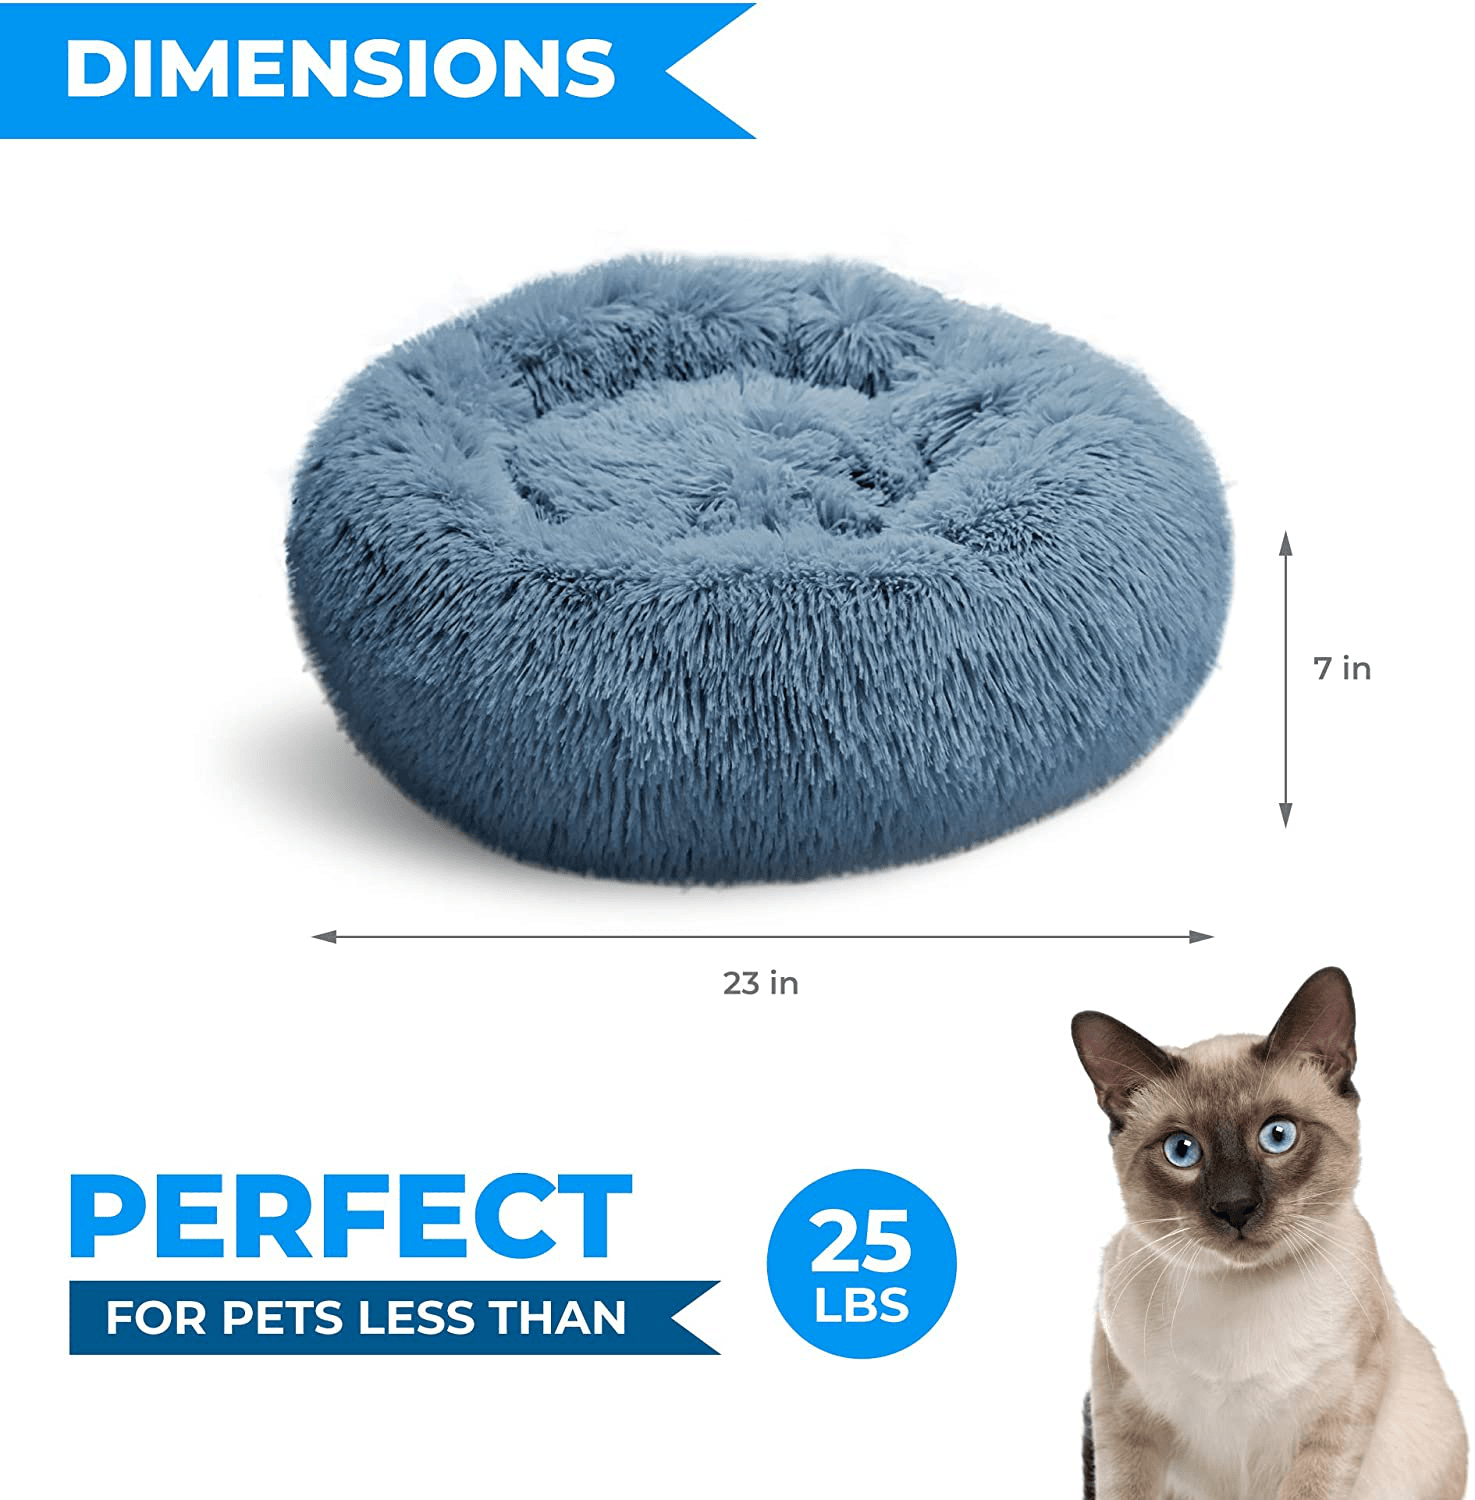 Whiskers & Friends Calming Cat Bed, Cat Bed for Indoor Cats, Calming Dog Bed for Small Dogs, Orthopedic Cat Bed, Donut Cat Bed, Dog Beds for Small Dogs, up to 25Lbs, Washable